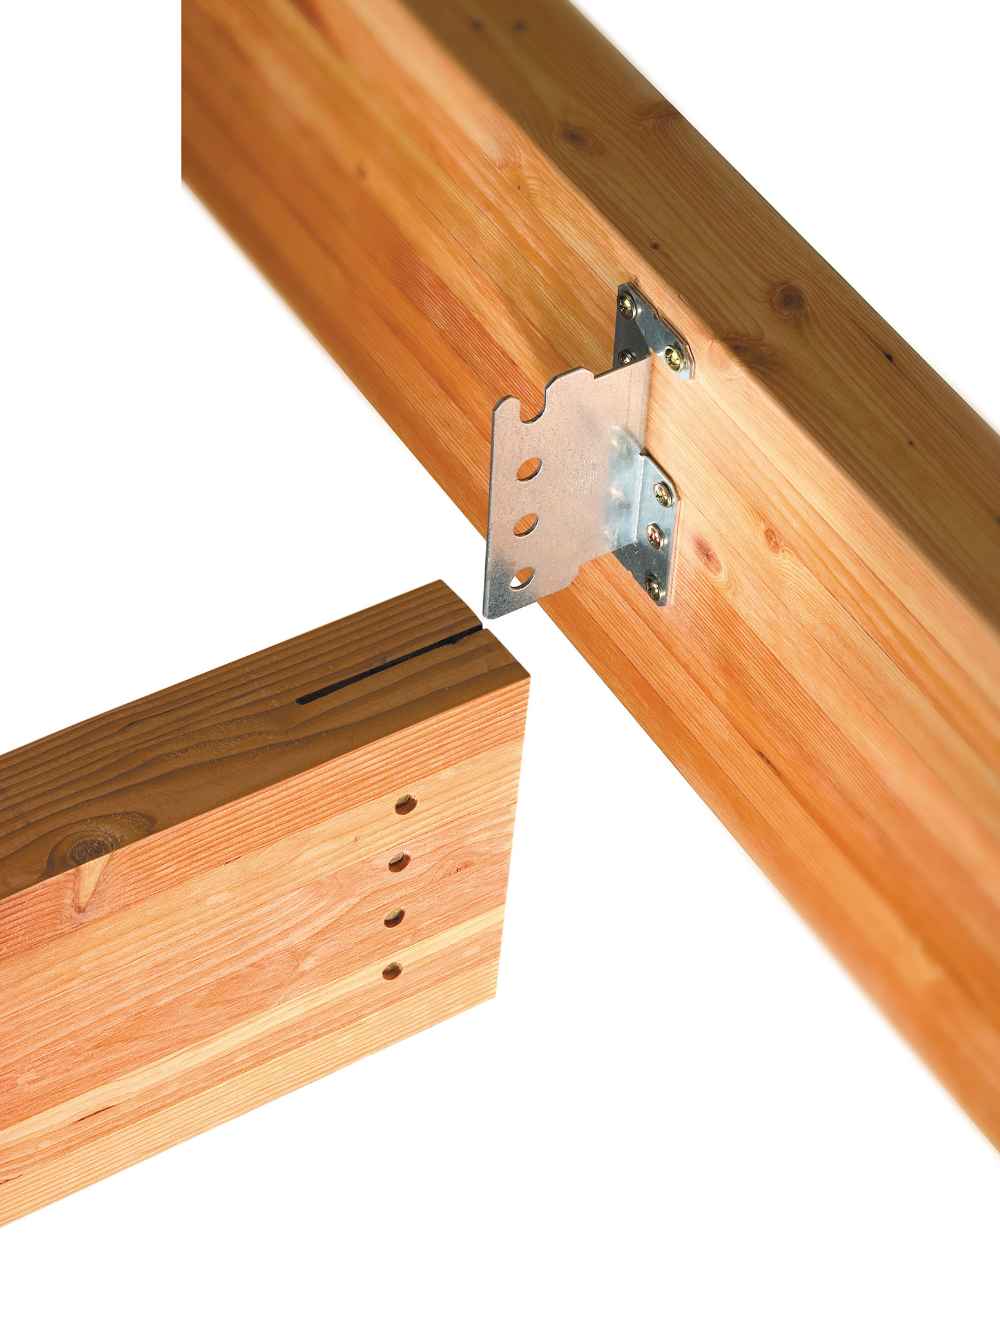 Simpson CJT6ZL Concealed Joist Tie w Long Pins ZMAX Finish image 3 of 5